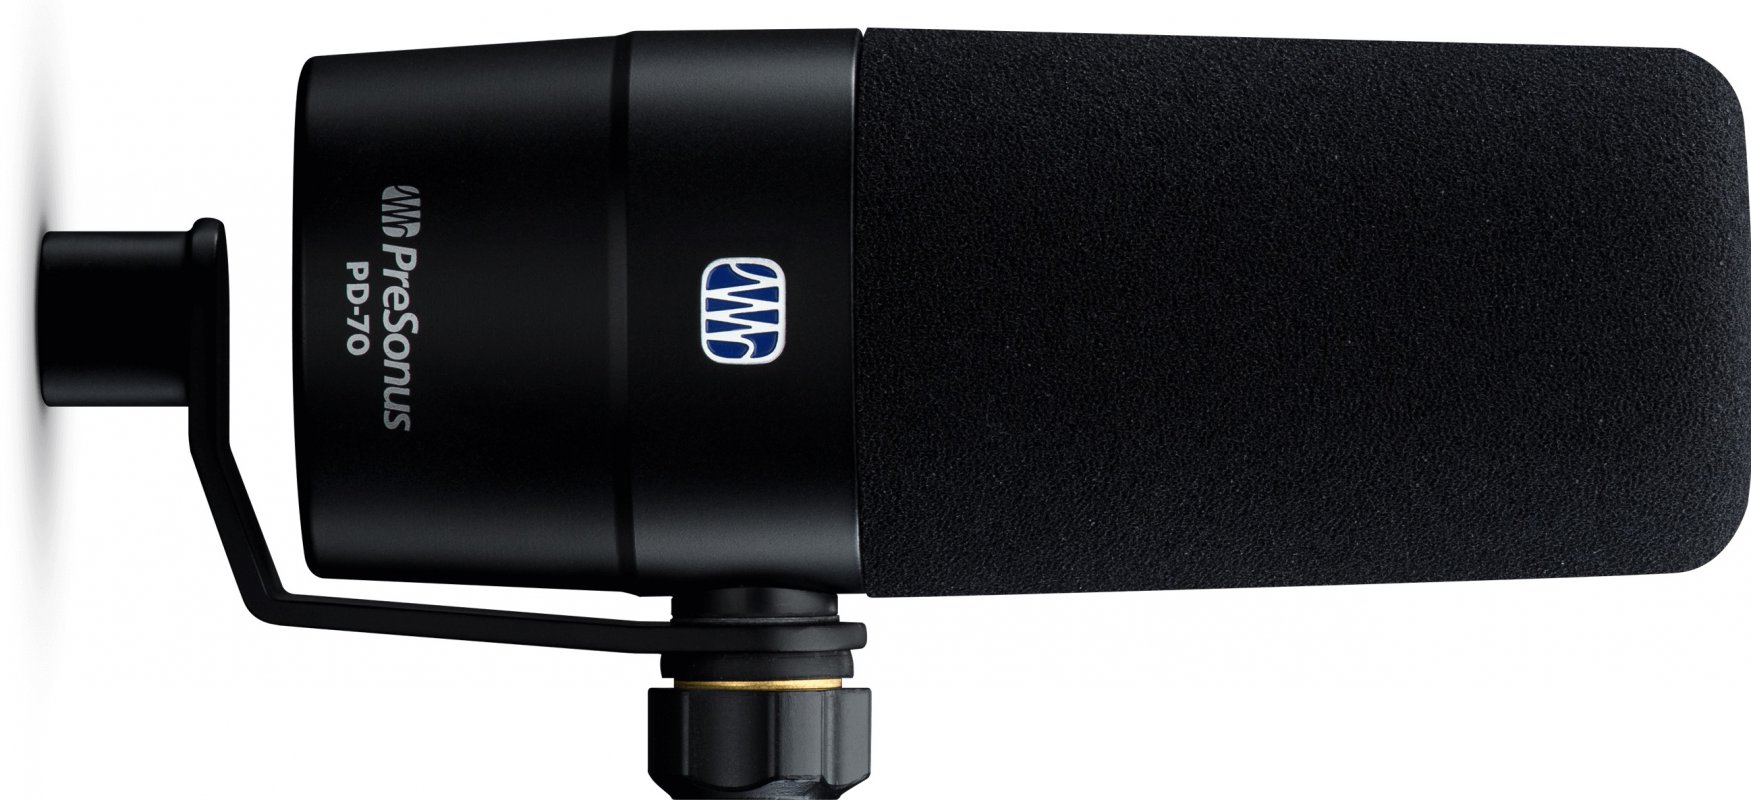 Mer information om "PreSonus PD-70 Broadcast Mic Delivers Clarity for the Spoken Word"